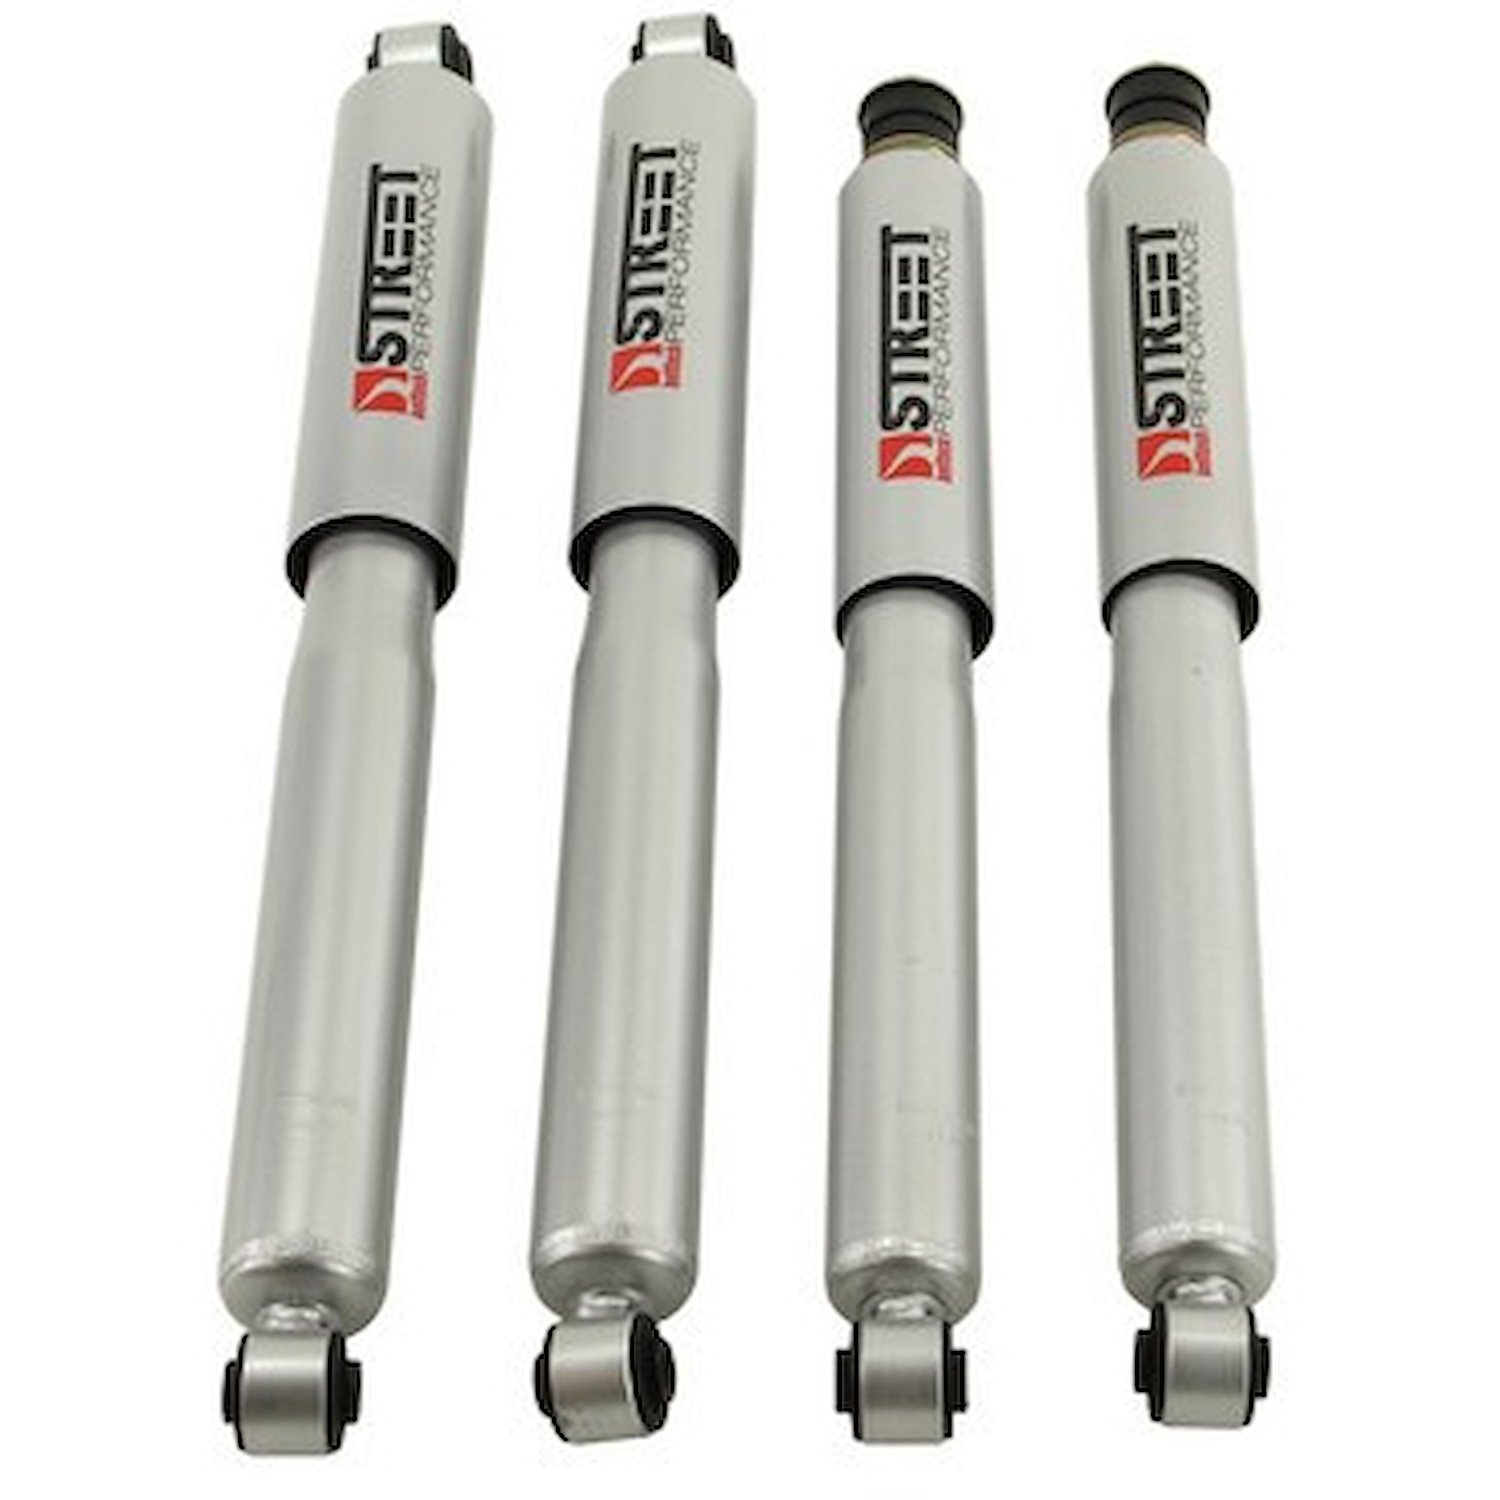 Street Performance OEM Shock Set for 1970-1979 Ford F-100/F-150 4WD